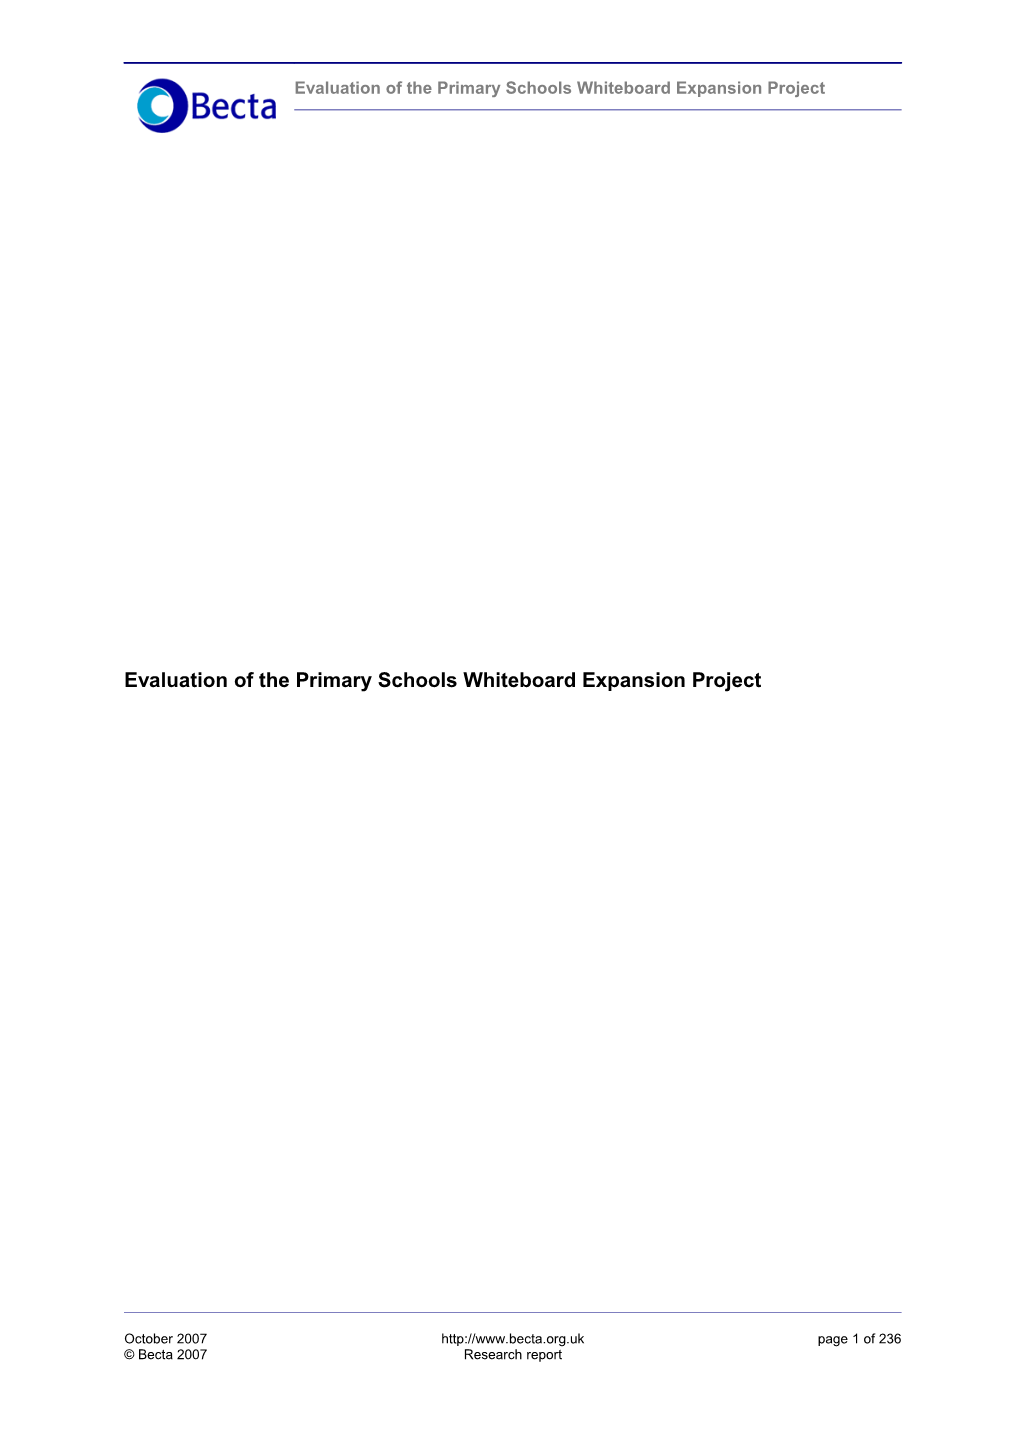 Evaluation of the Primary Schools Whiteboard Expansion Project